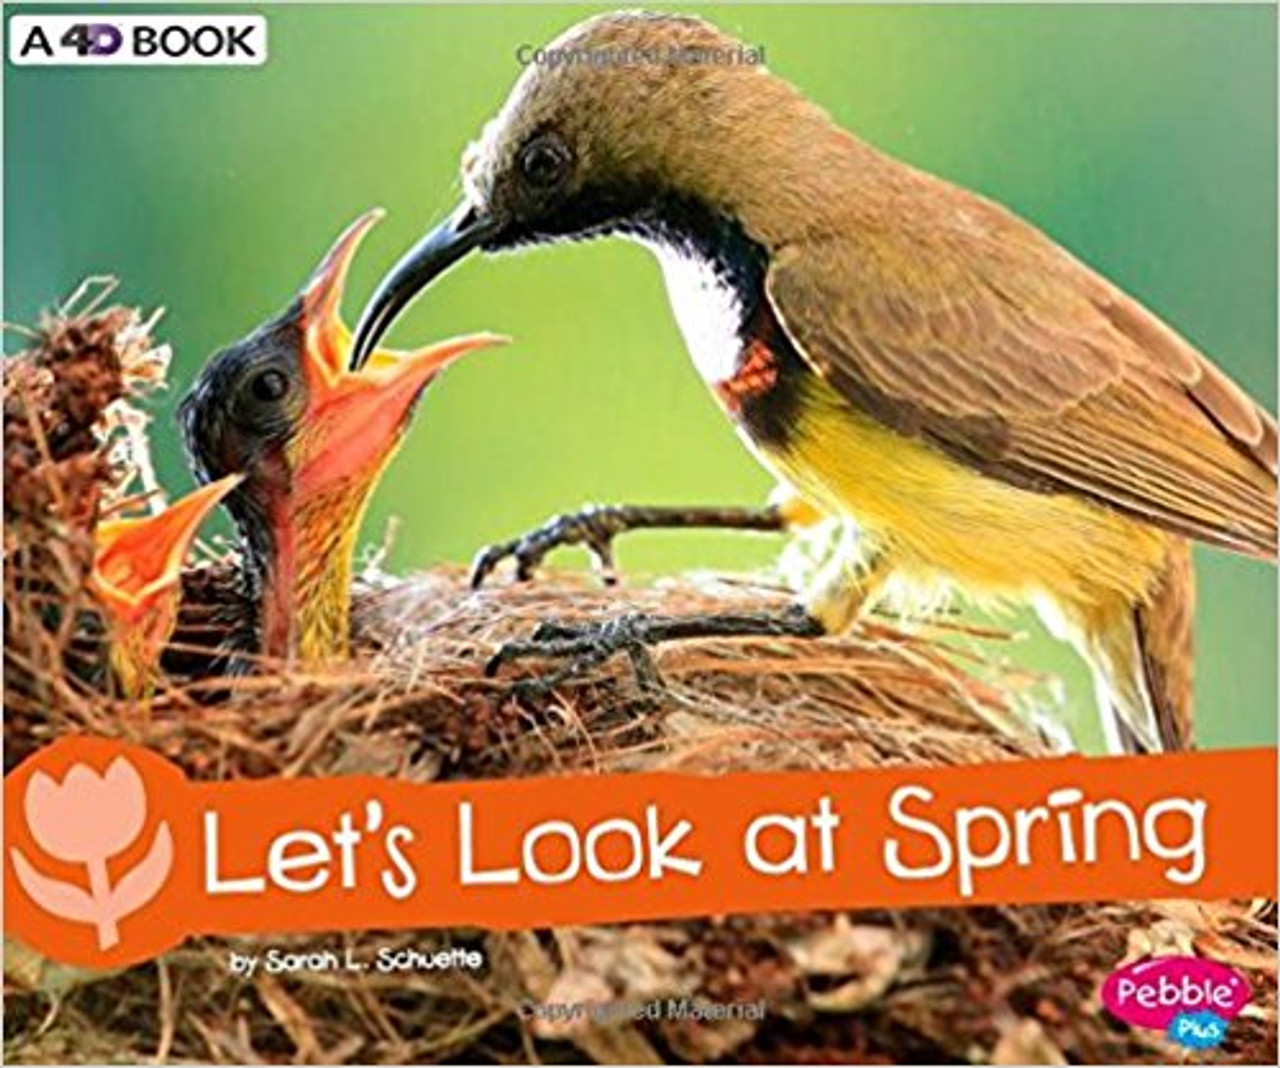 Let's Look at Spring: A 4D Book by Sarah L Schuette